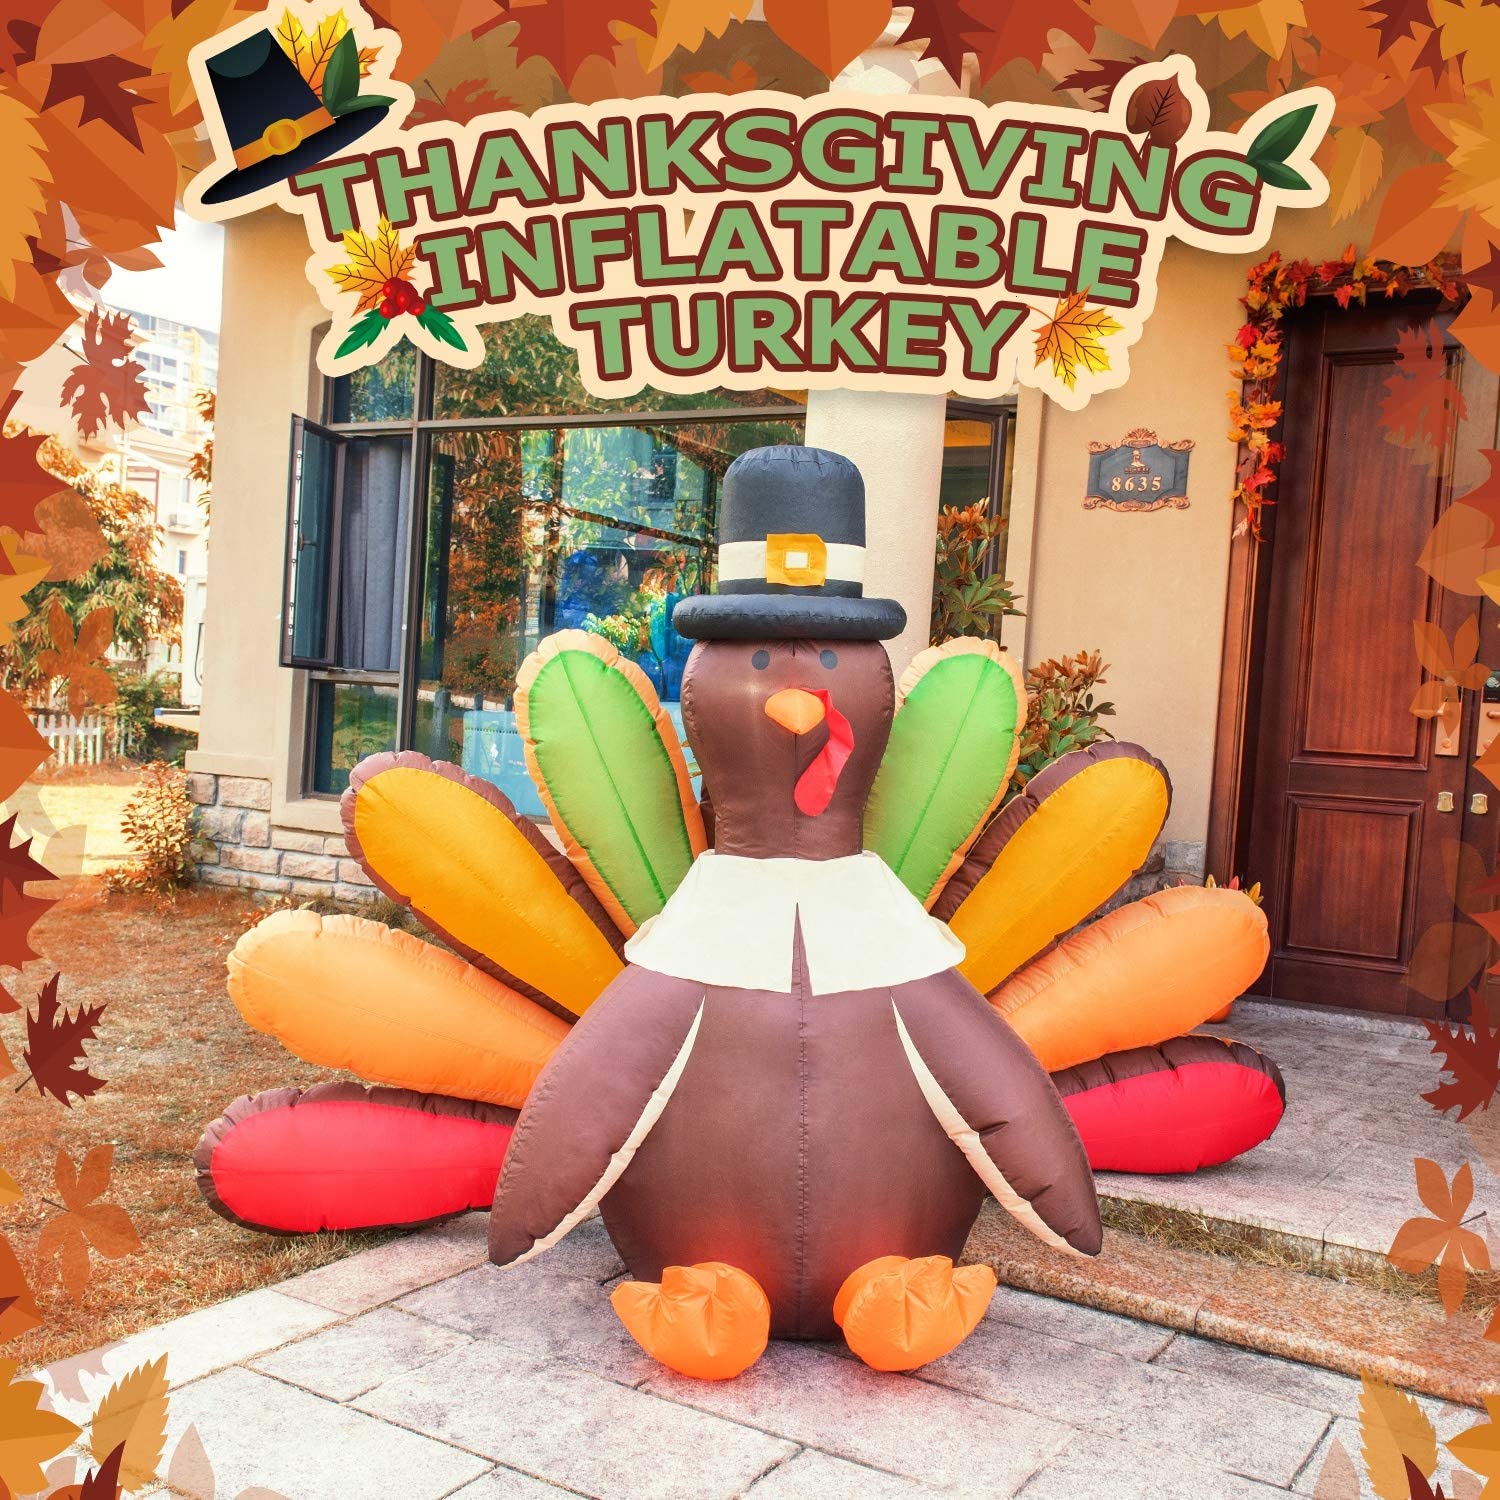 You Can Get A 5 Foot Inflatable Turkey To Start The Thanksgiving Season ...